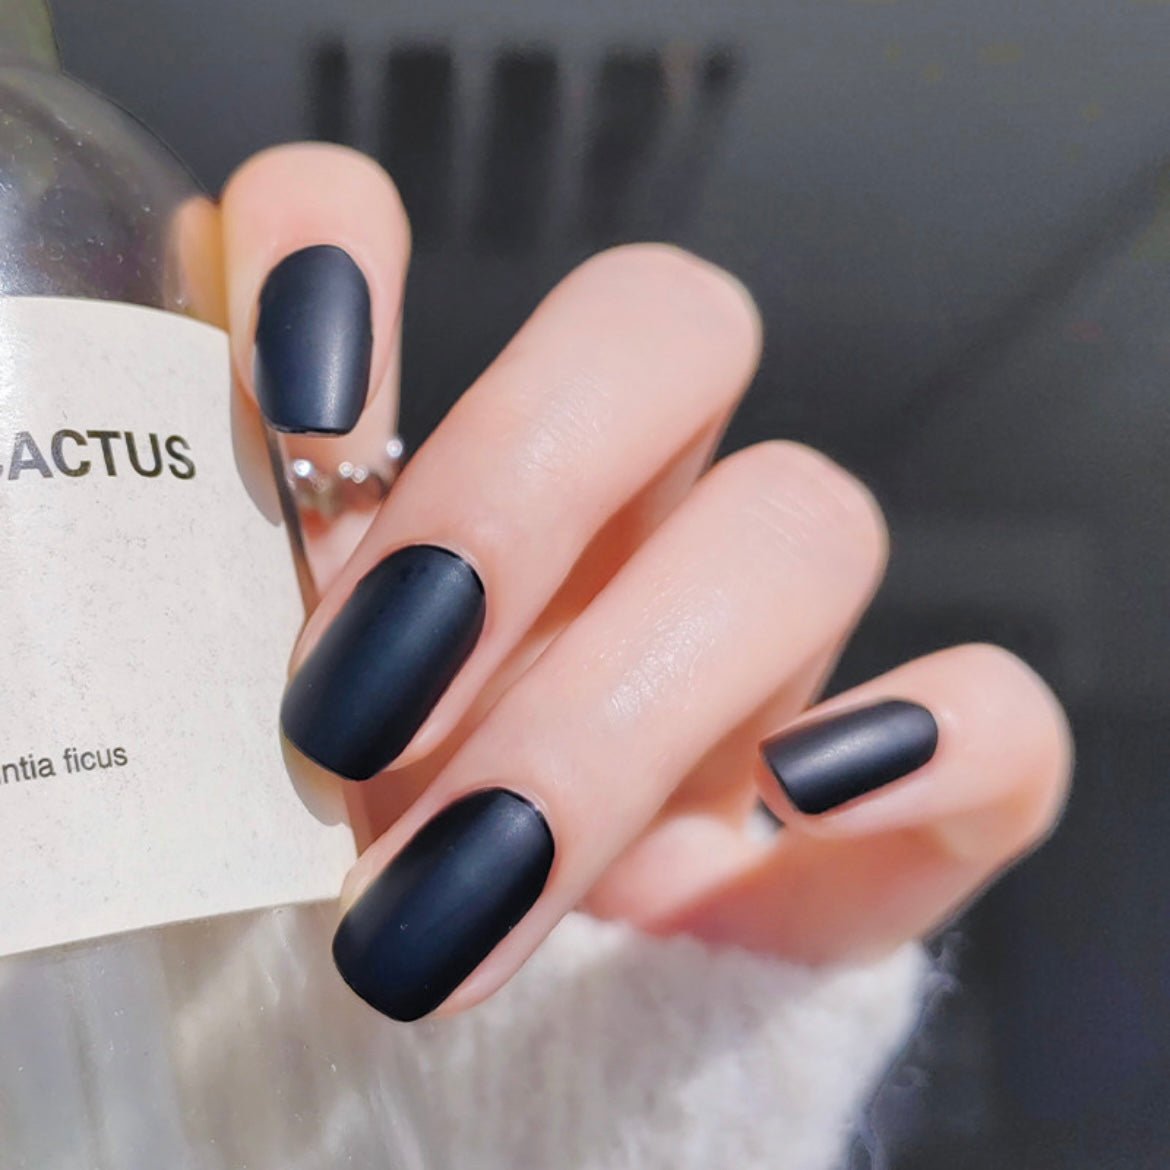 Matte Matters - 5 Reasons to Go Matte This Fall